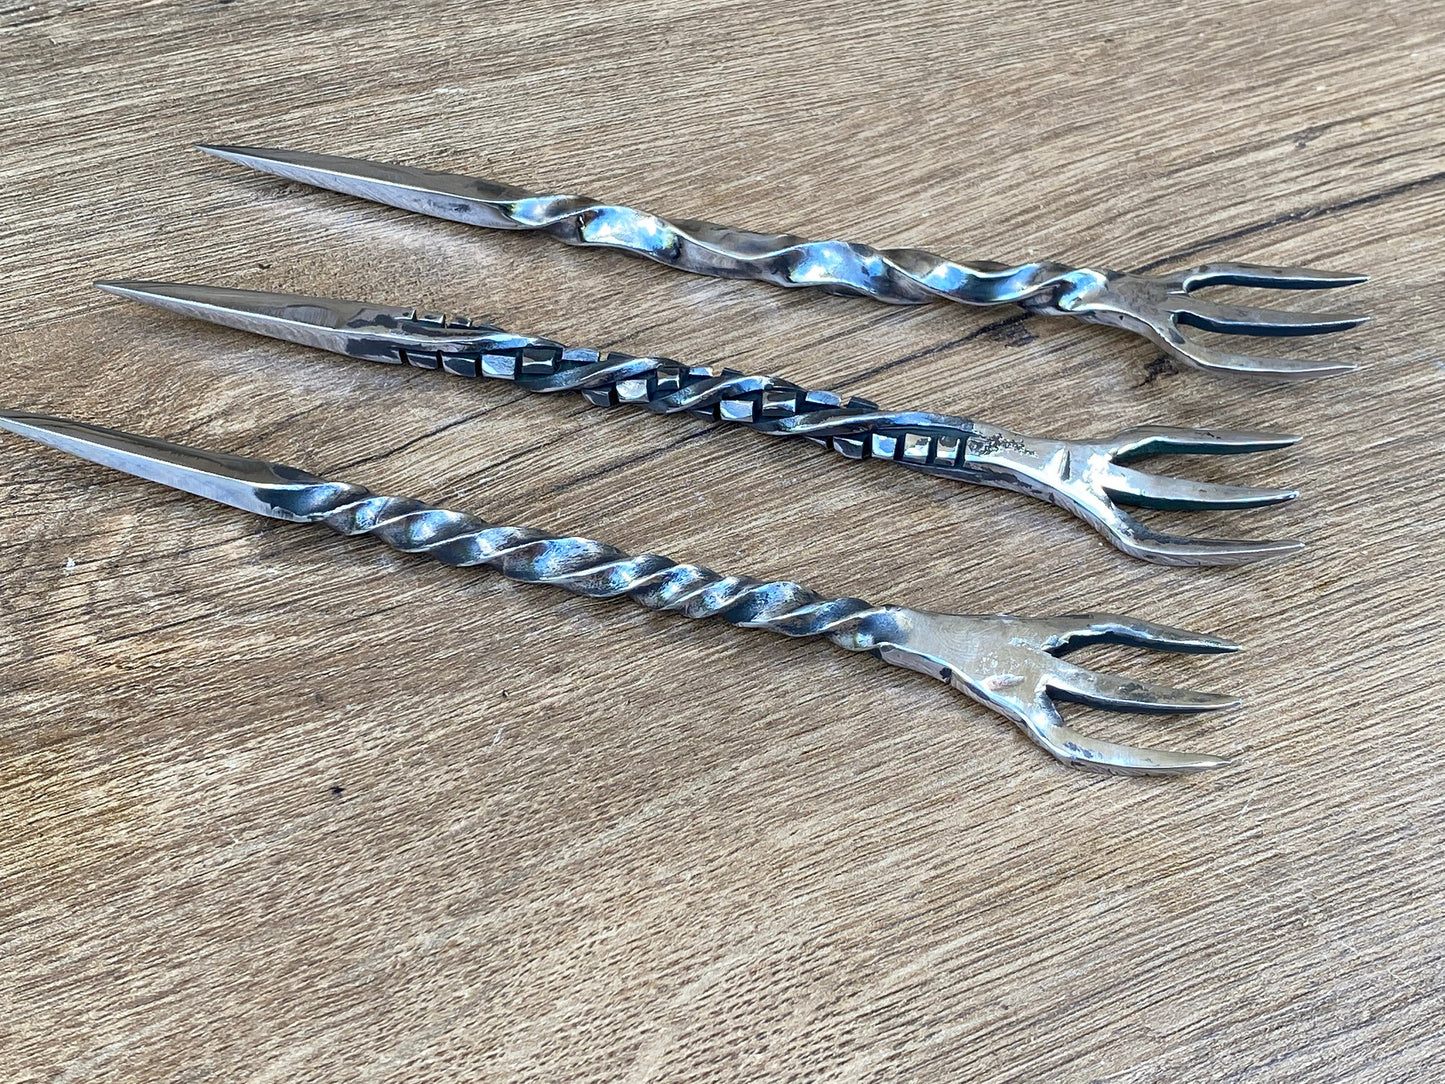 Stainless steel forks, cutlery, flatware, BBQ forks, skewers, BBQ gift, steel gift, grill tools,medieval cutlery,fork,kitchen gift,Christmas